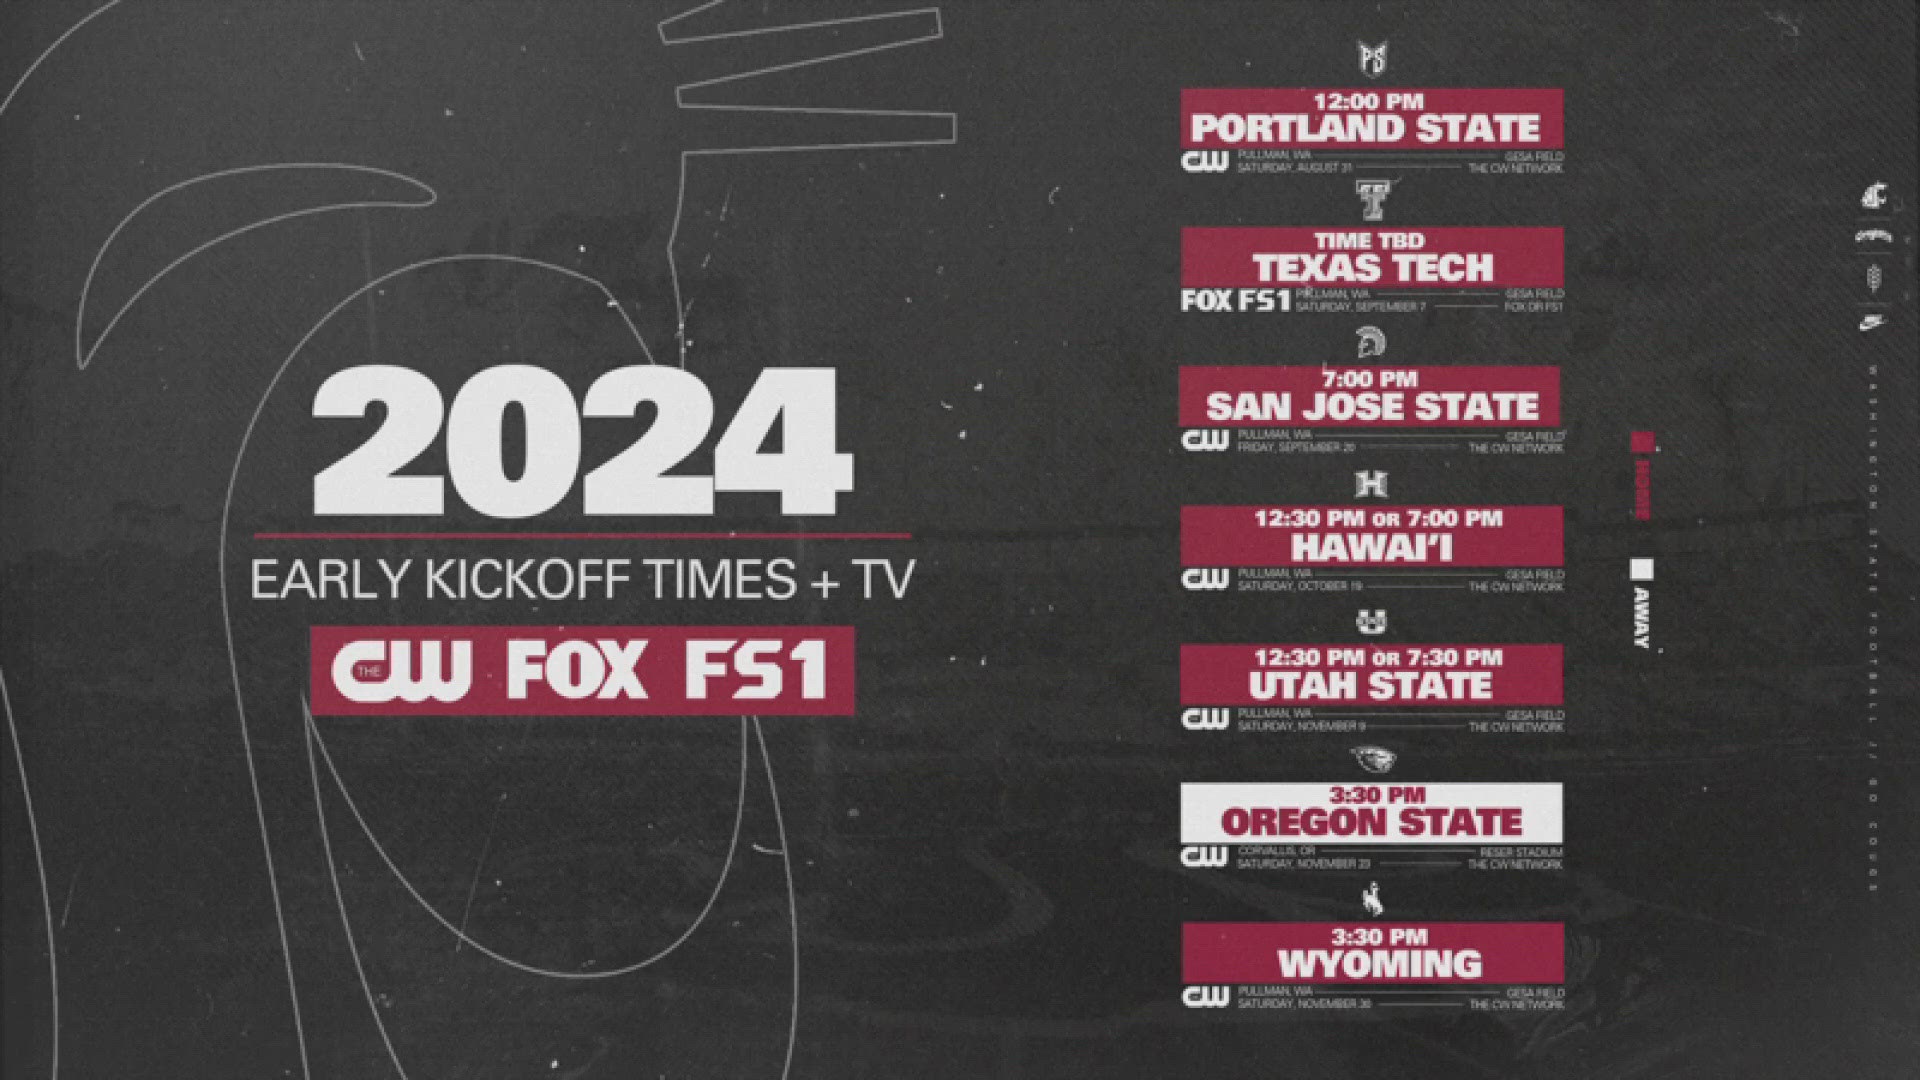 The Cougs games that will air on the CW include: Portland State, San Jose State, Hawaii, Utah State, Oregon State and Wyoming.